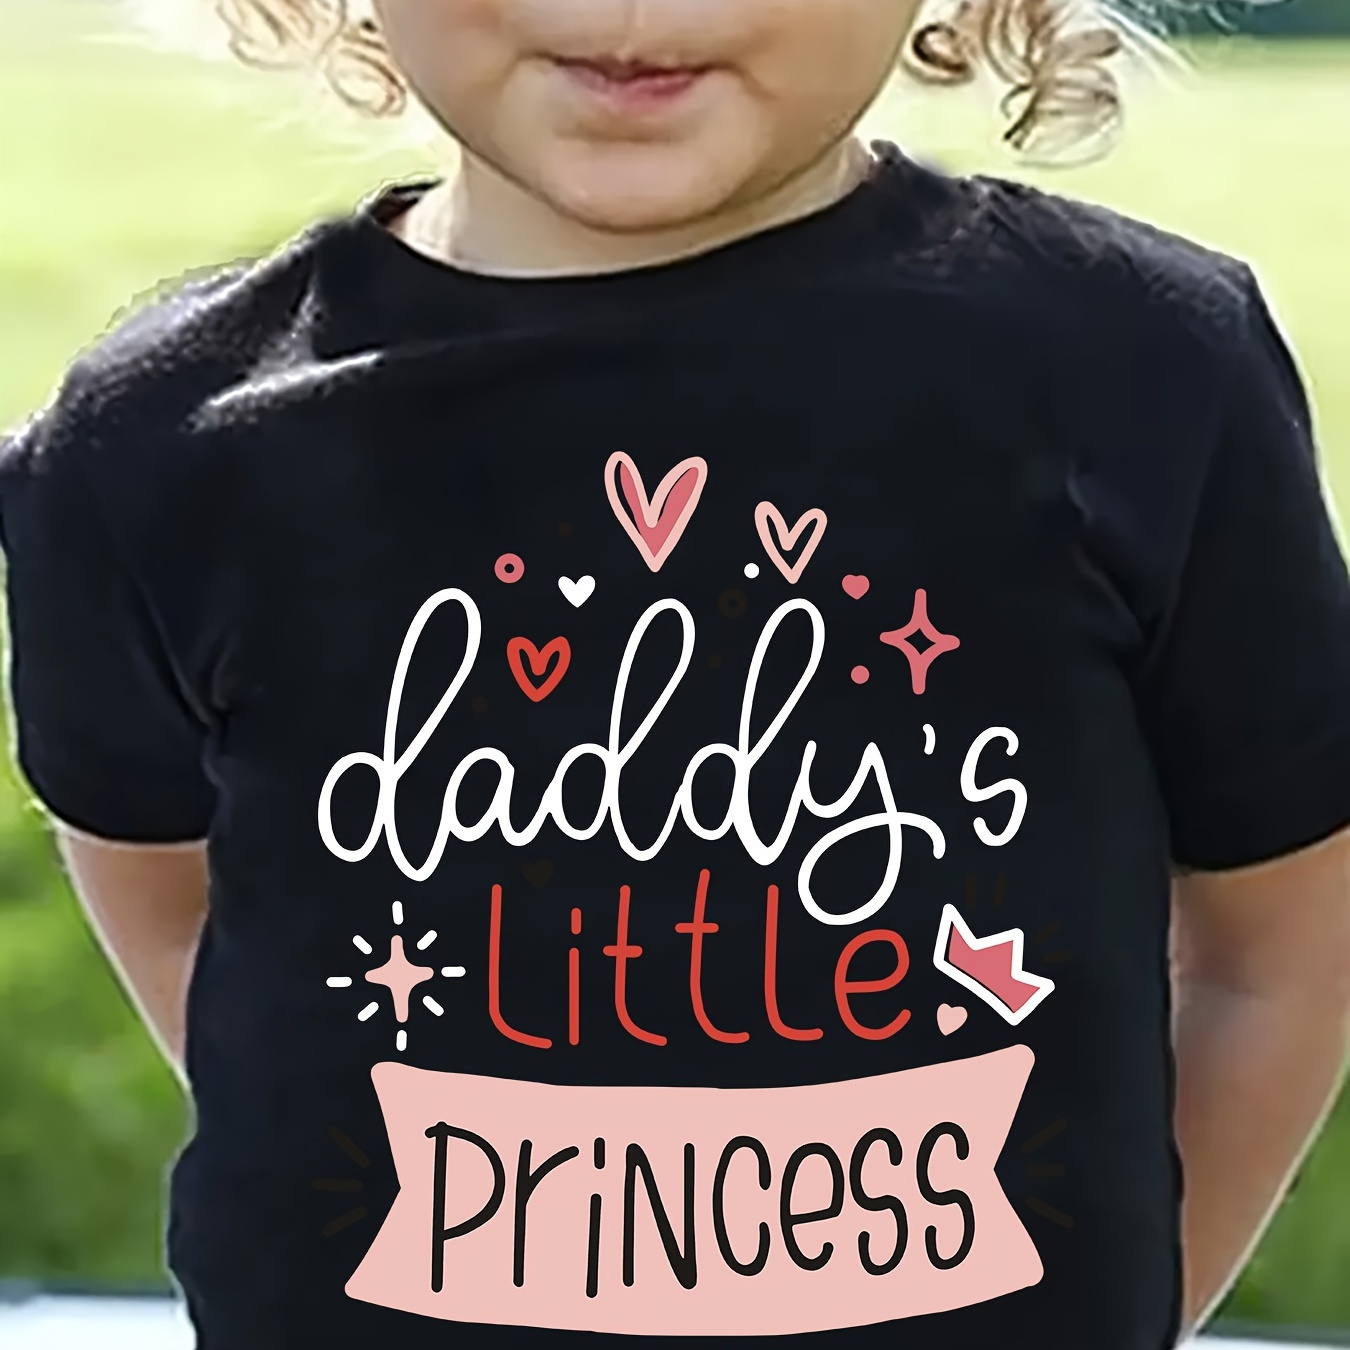 

Graffiti Daddy's Little Princess & Hearts Graphic Print Tee, Girls' Casual & Comfy Crew Neck Short Sleeve T-shirt For Spring & Summer, Girls' Clothes For Outdoor Activities & Father's Day